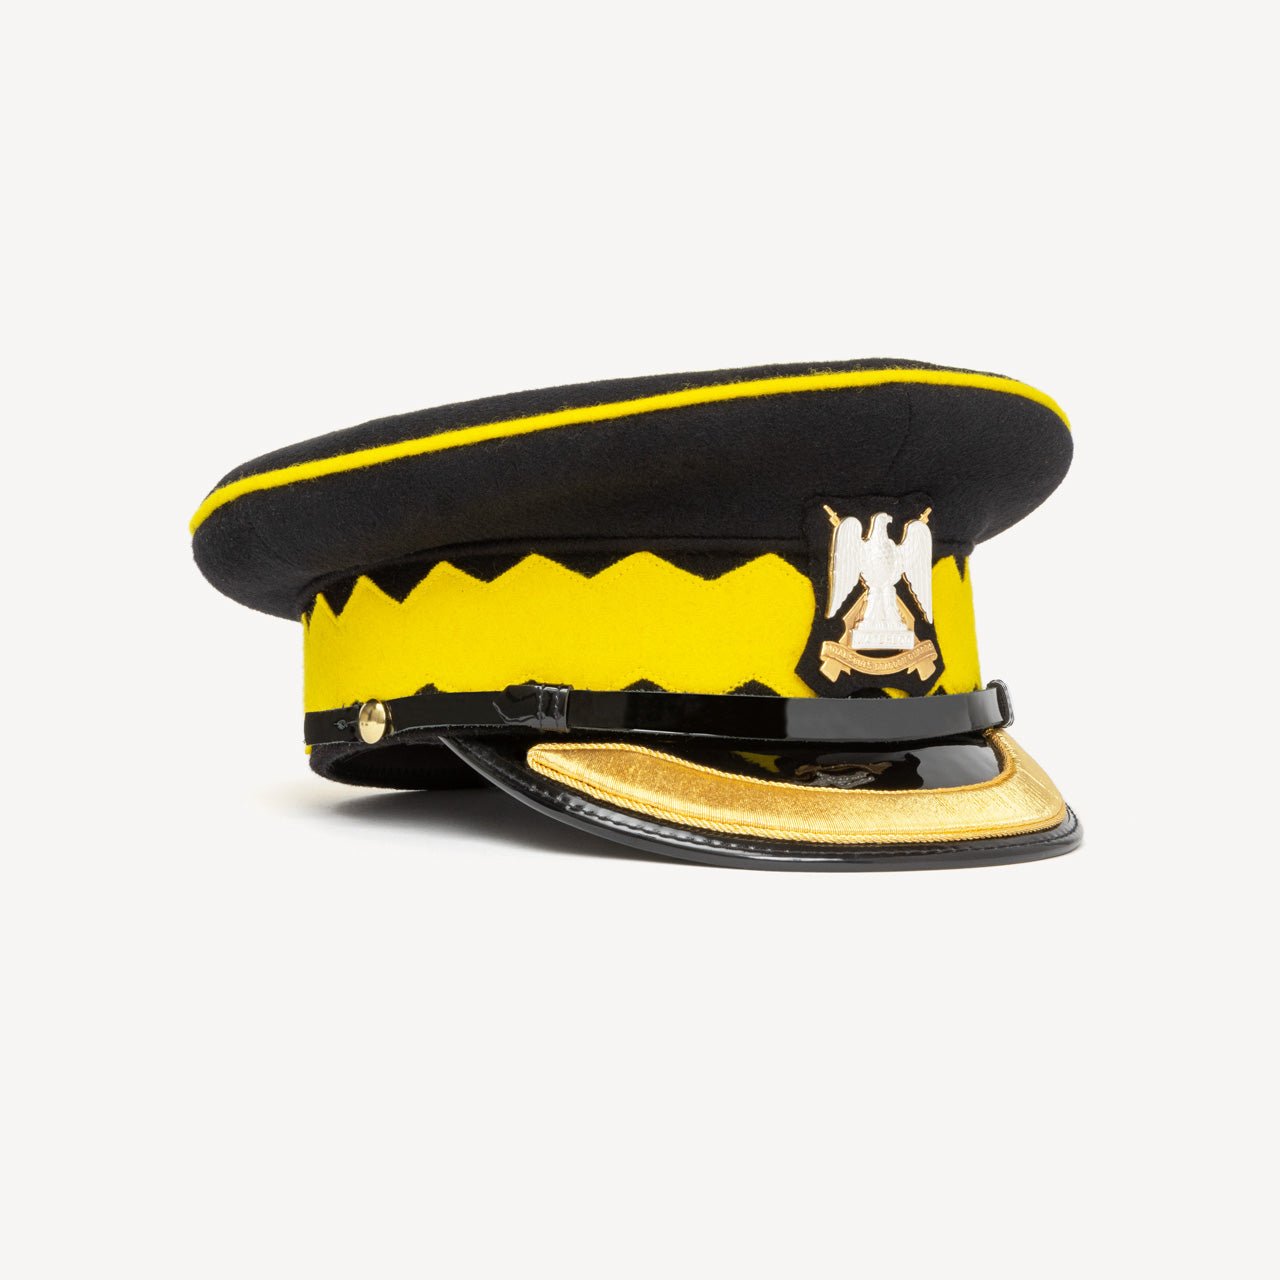 No.1 SERVICE DRESS HATS WITH GOLD PEAKS - Swaine